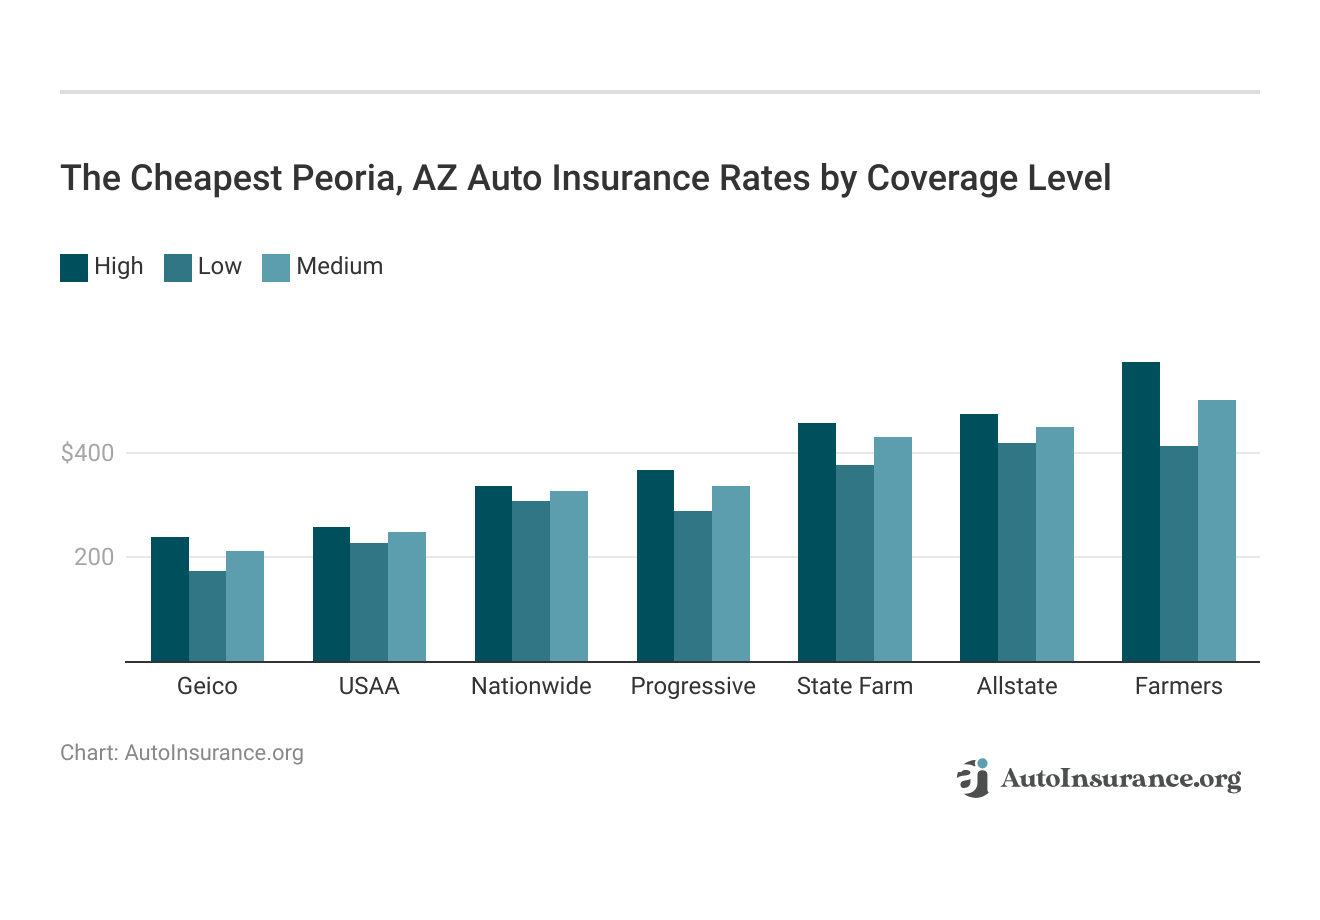 <h3>The Cheapest Peoria, AZ Auto Insurance Rates by Coverage Level</h3>